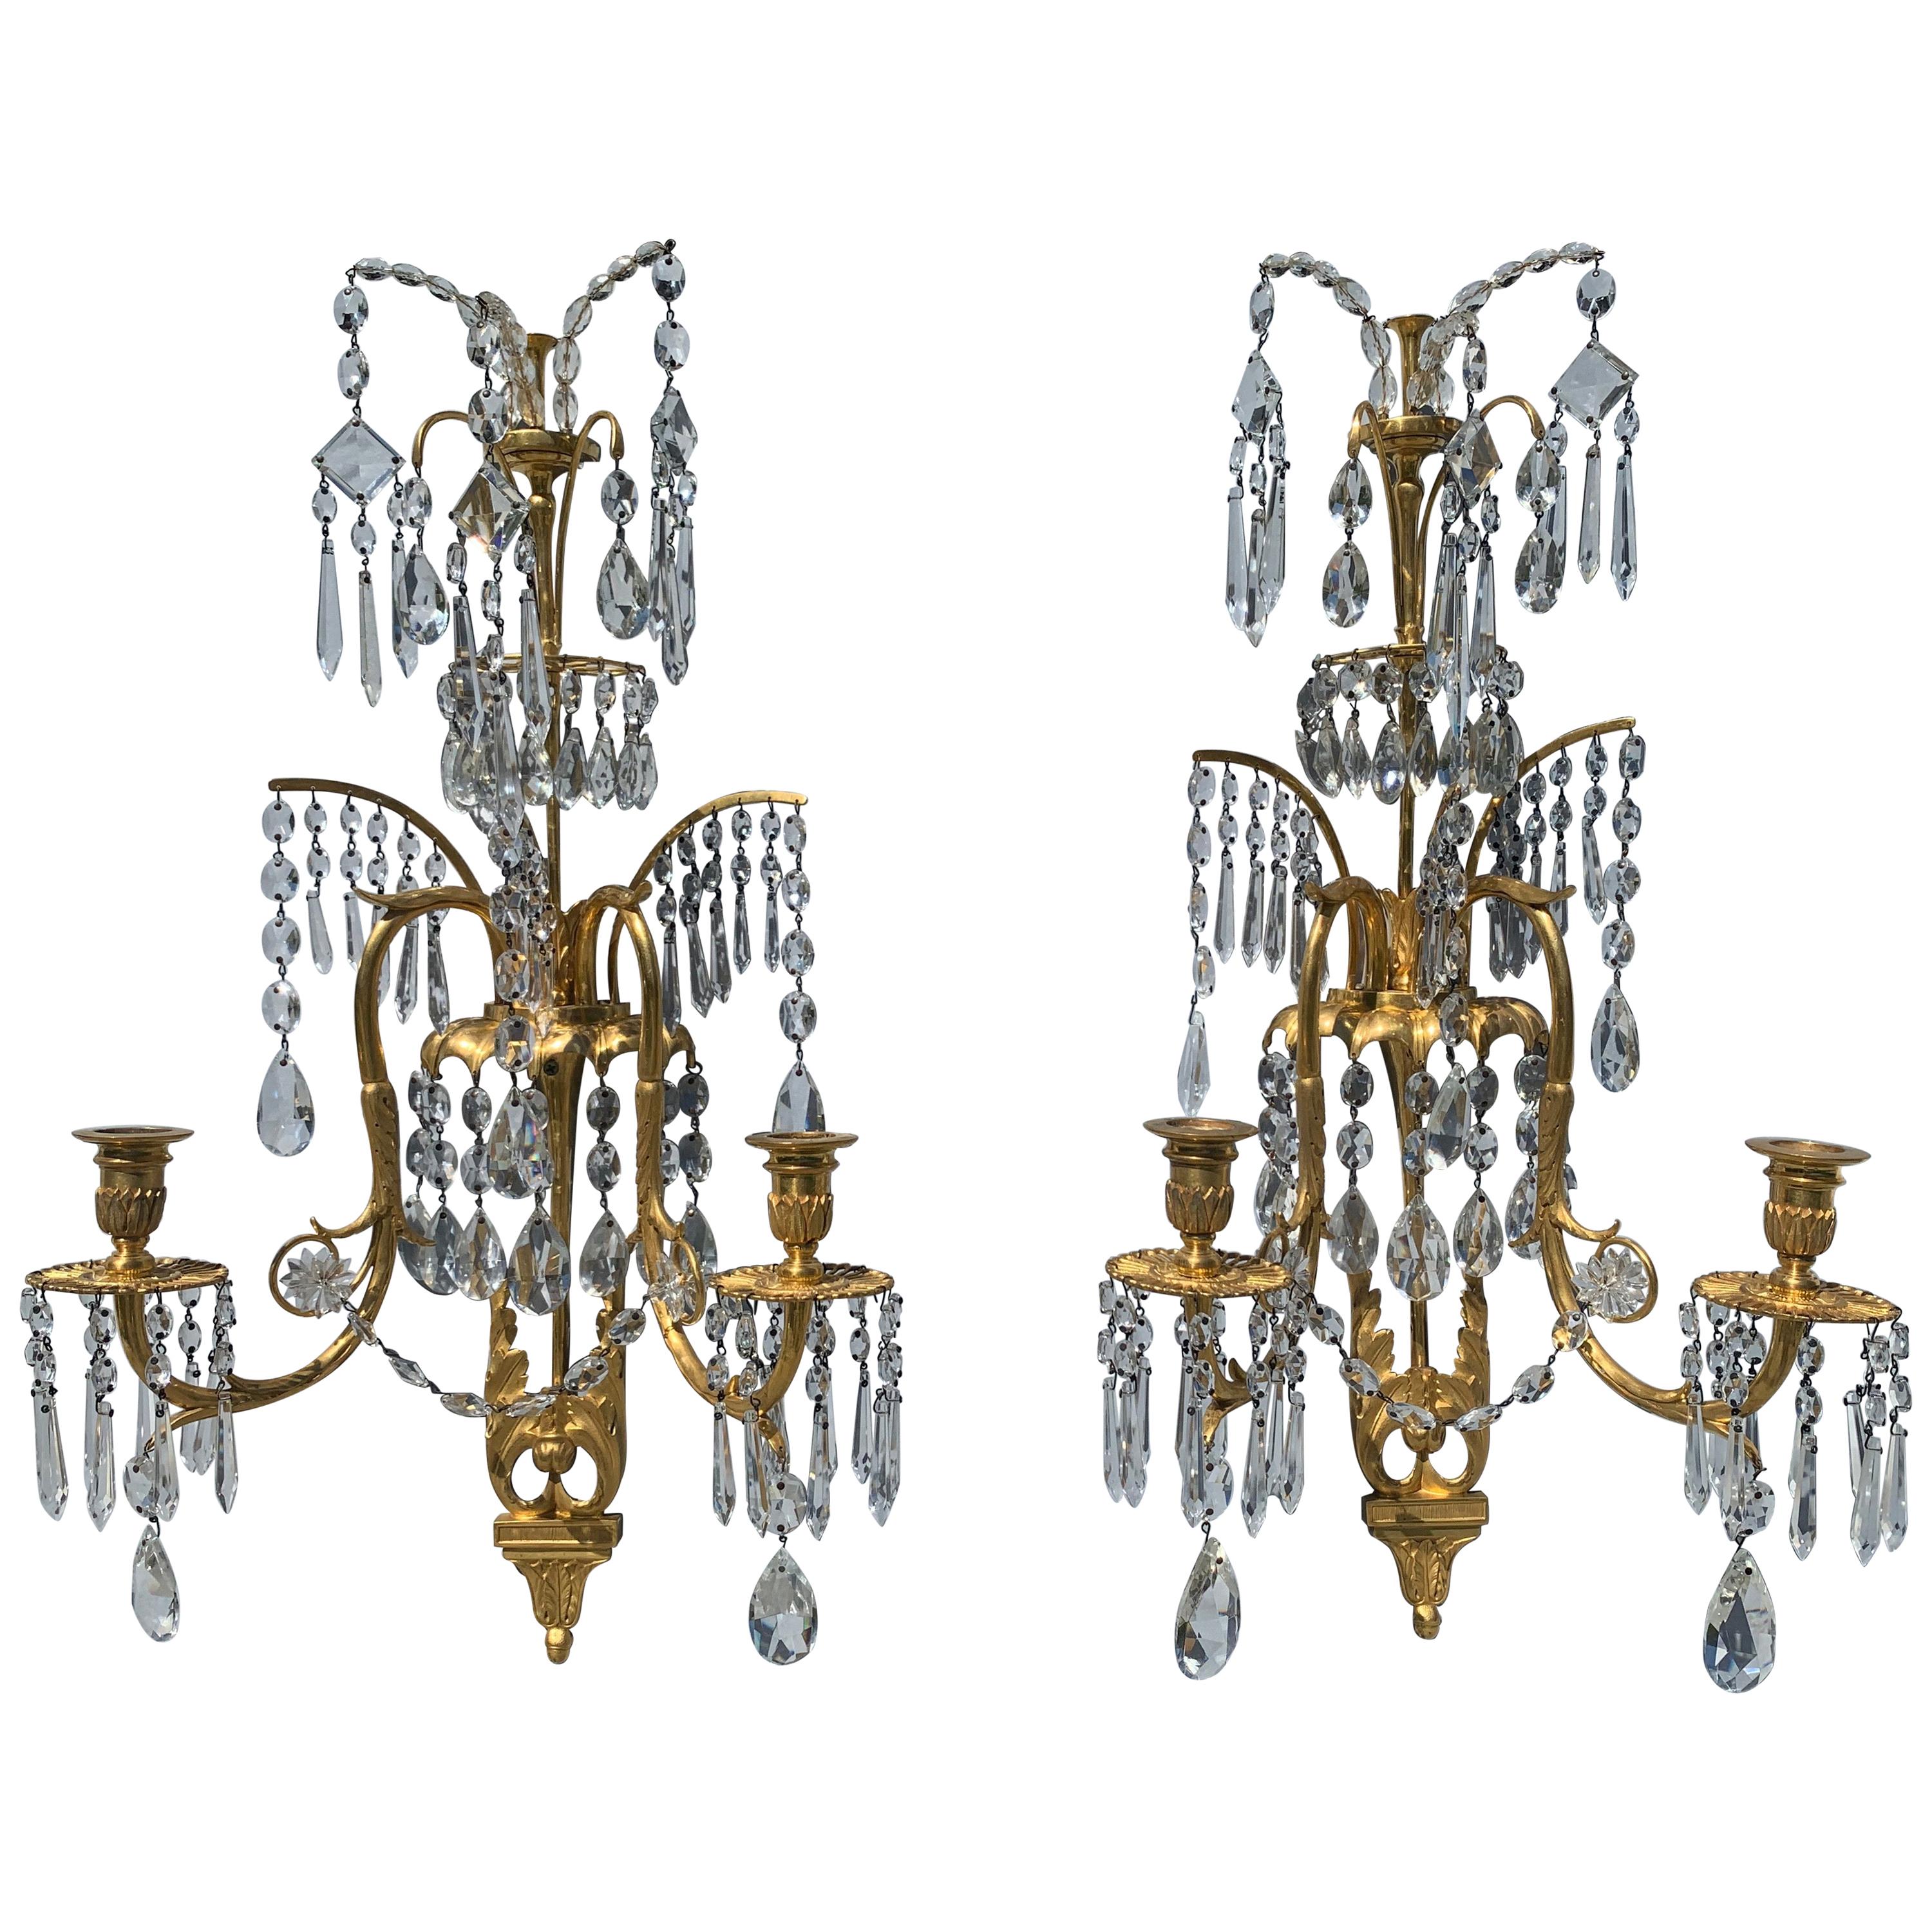 Pair of Neoclassical Gilt Wall Sconces